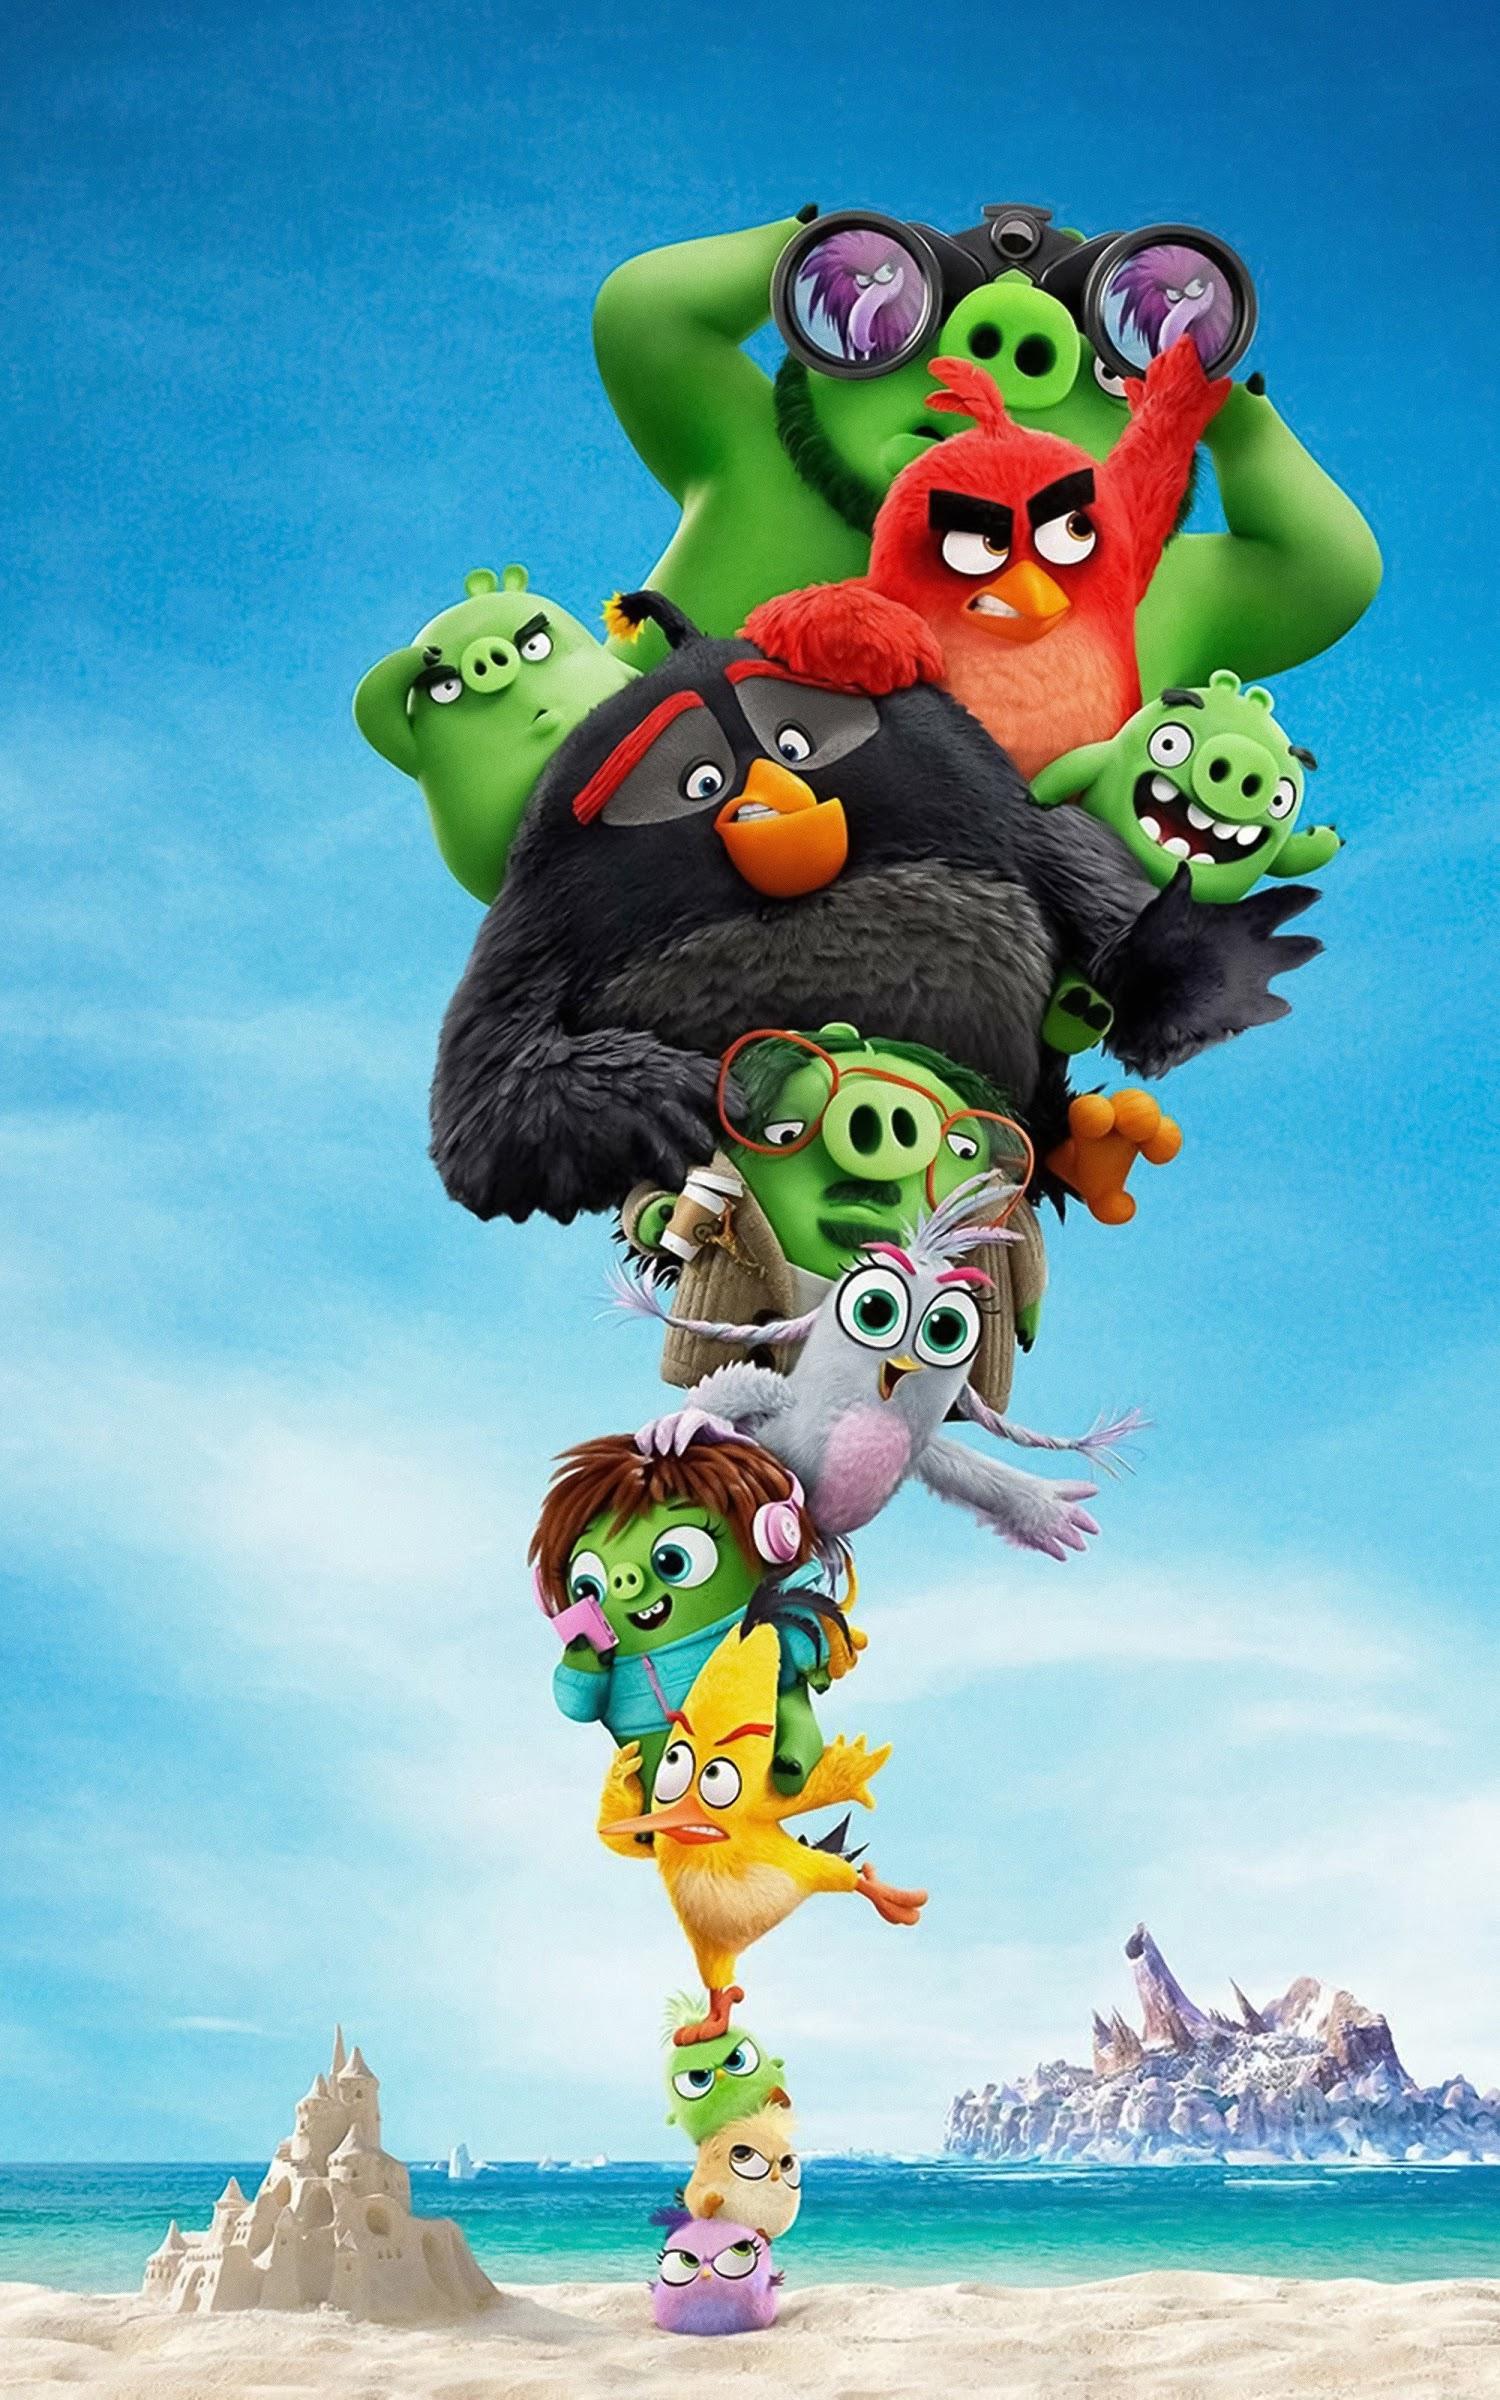 The Angry Birds Movie 2 wallpaper. Movies Category